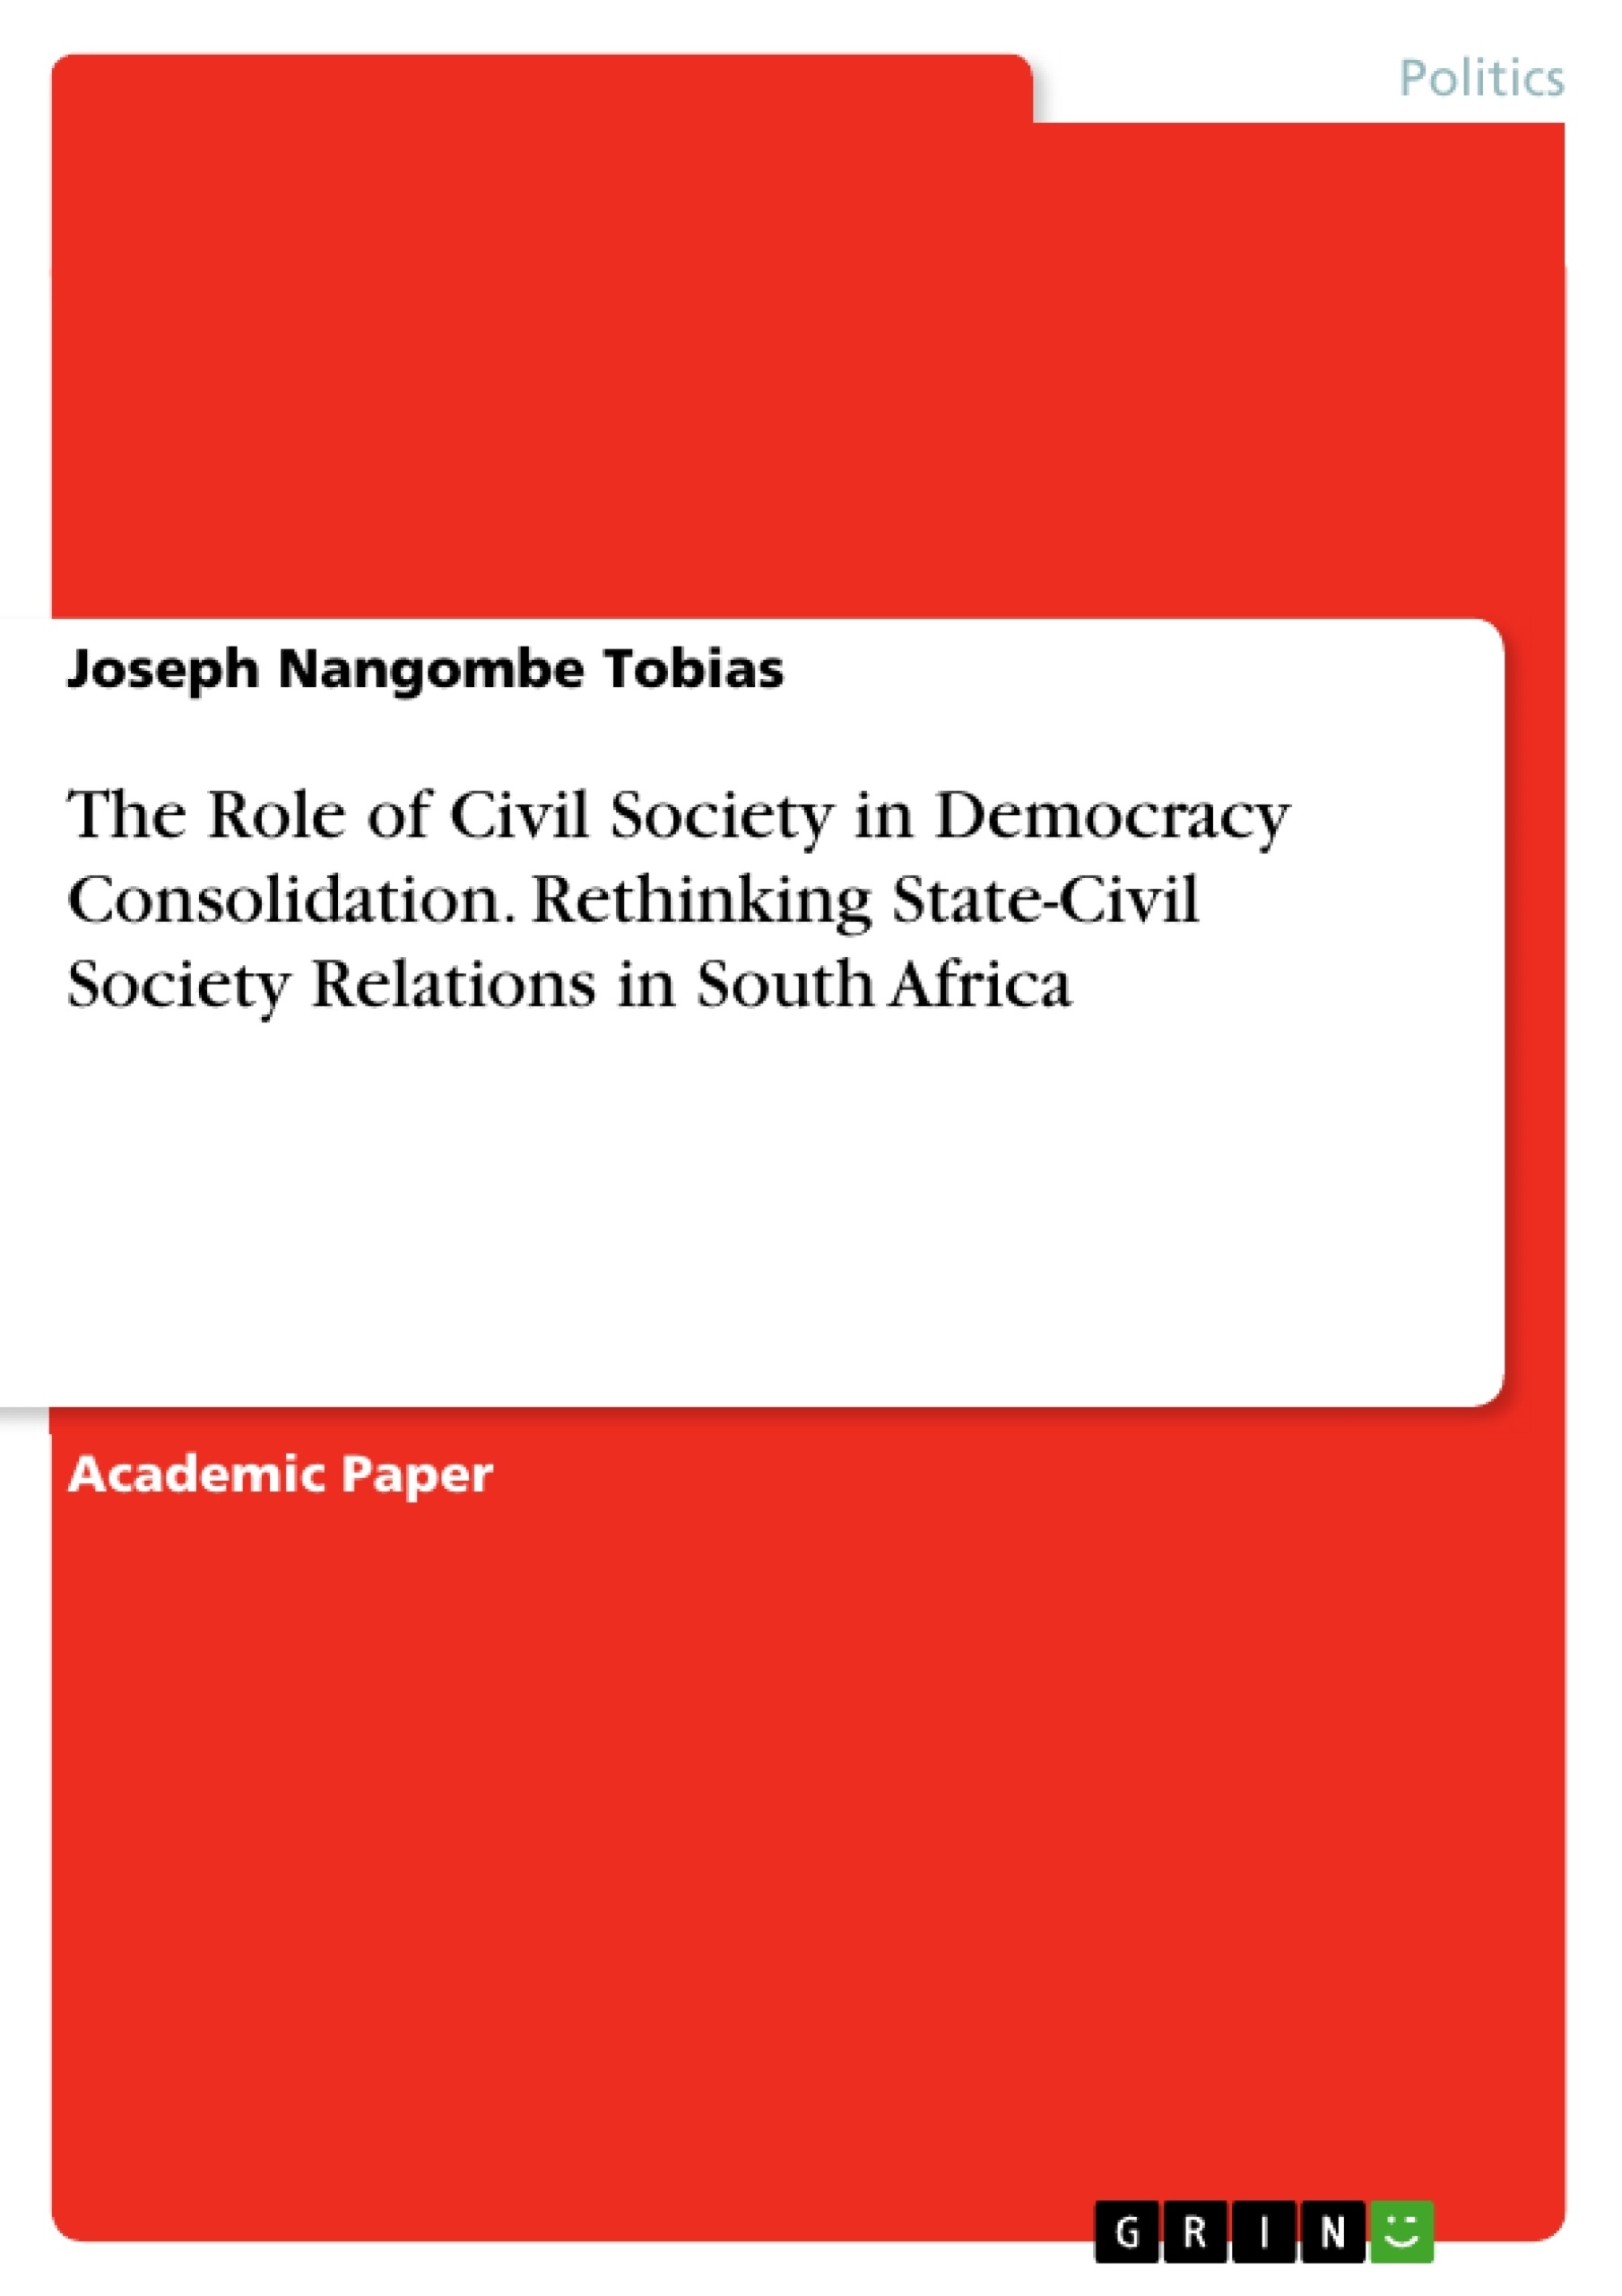 Título: The Role of Civil Society in Democracy Consolidation. Rethinking State-Civil Society Relations in South Africa